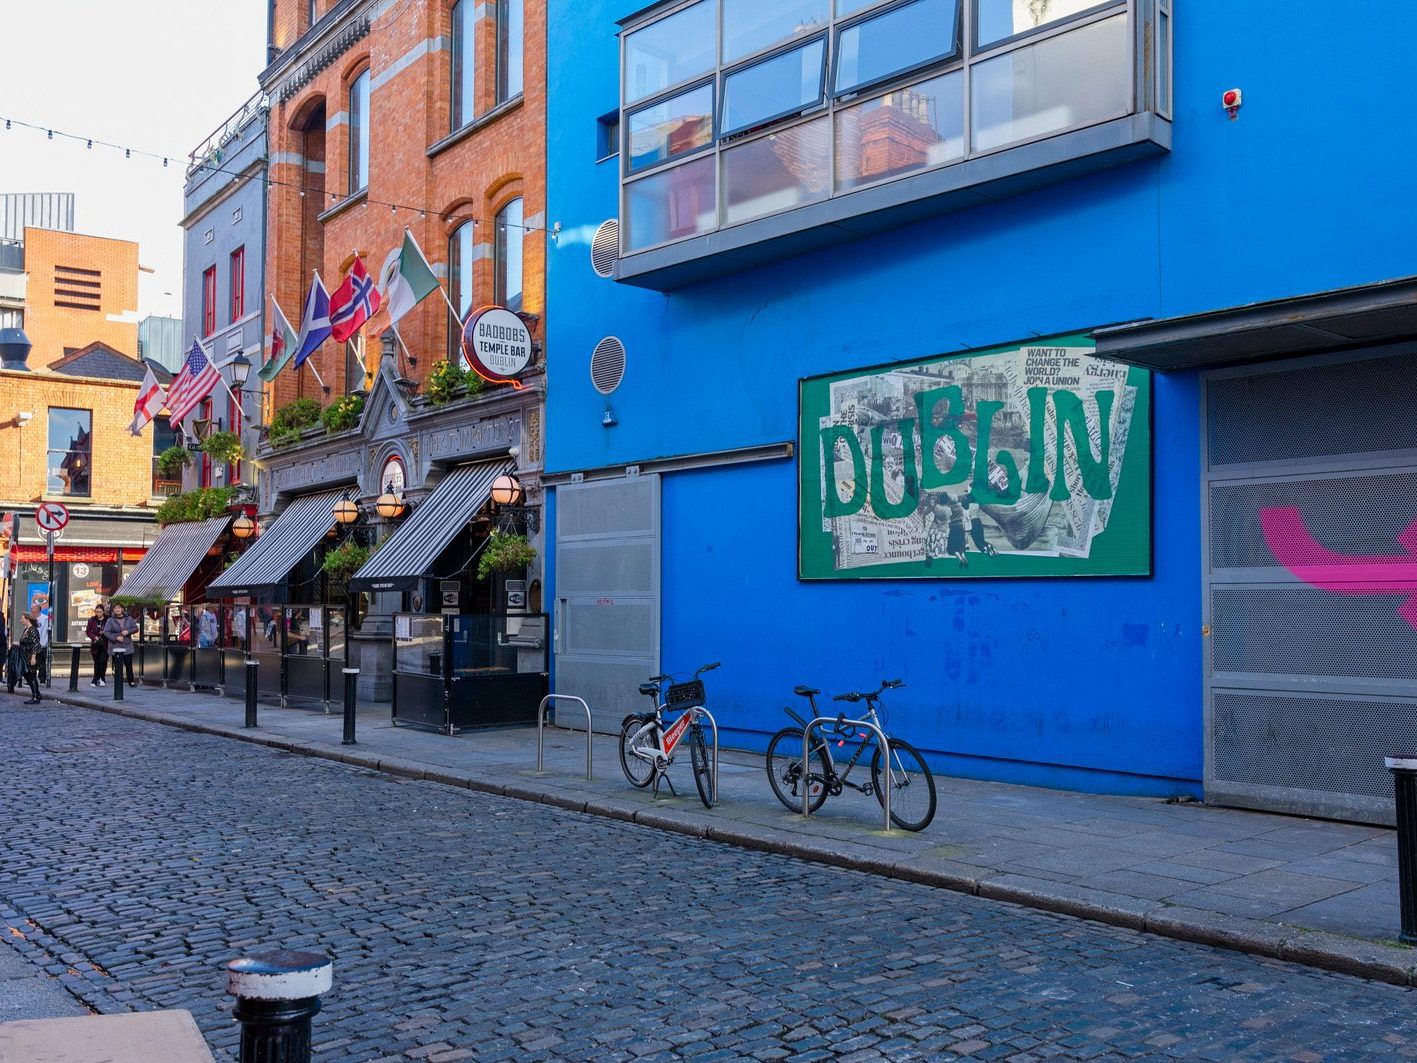 ESSEX STREET AND NEARBY AND THE ELEPHANT STORY [TEMPLE BAR AREA OF DUBLIN] 006